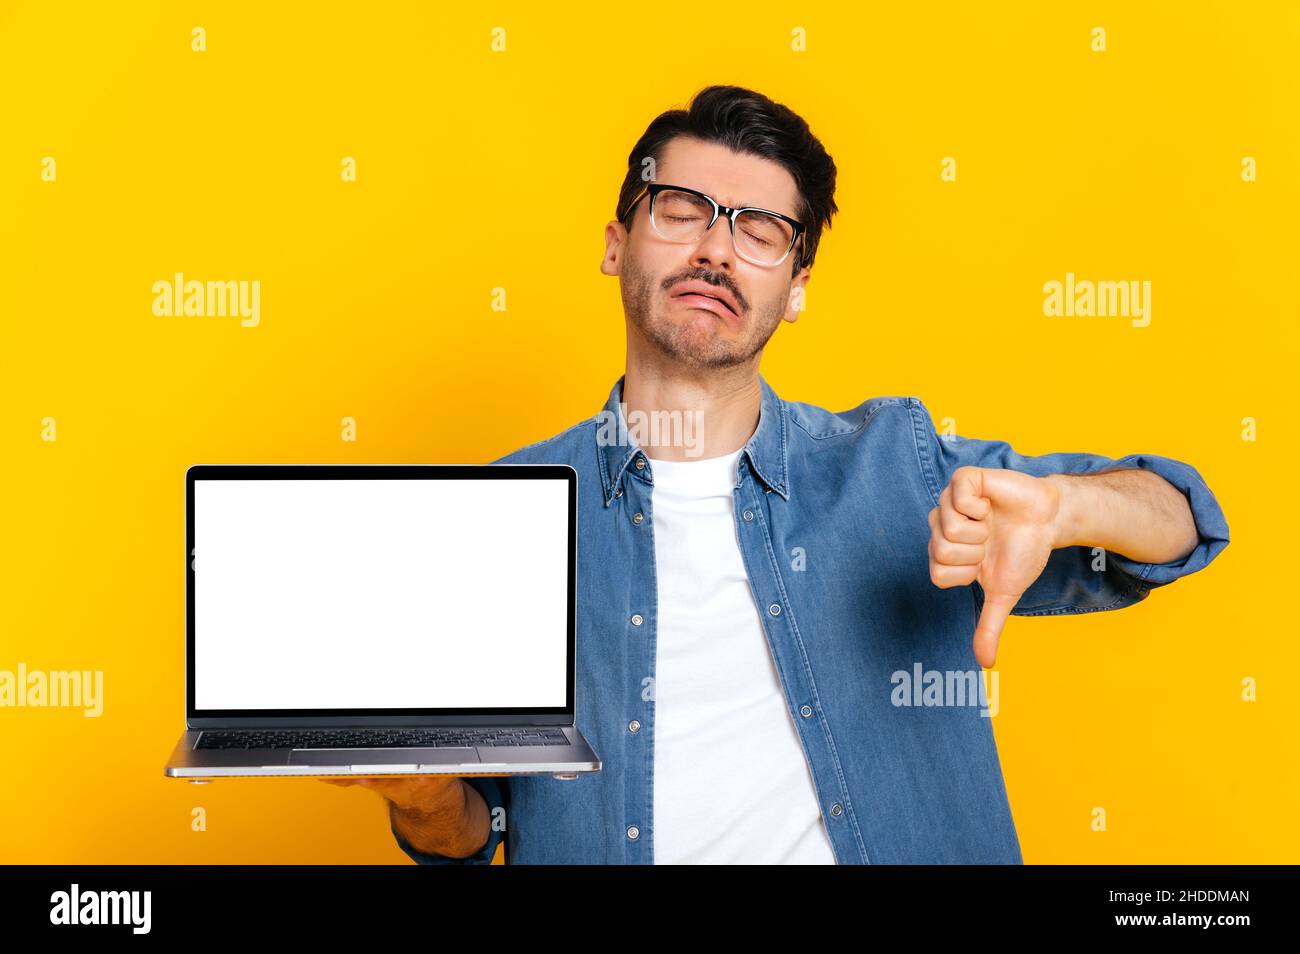 Upset crying caucasian modern guy with glasses, holding open laptop with blank white screen in hand, showing thumbs down, while standing against isolated orange background. Negative emotion Stock Photo